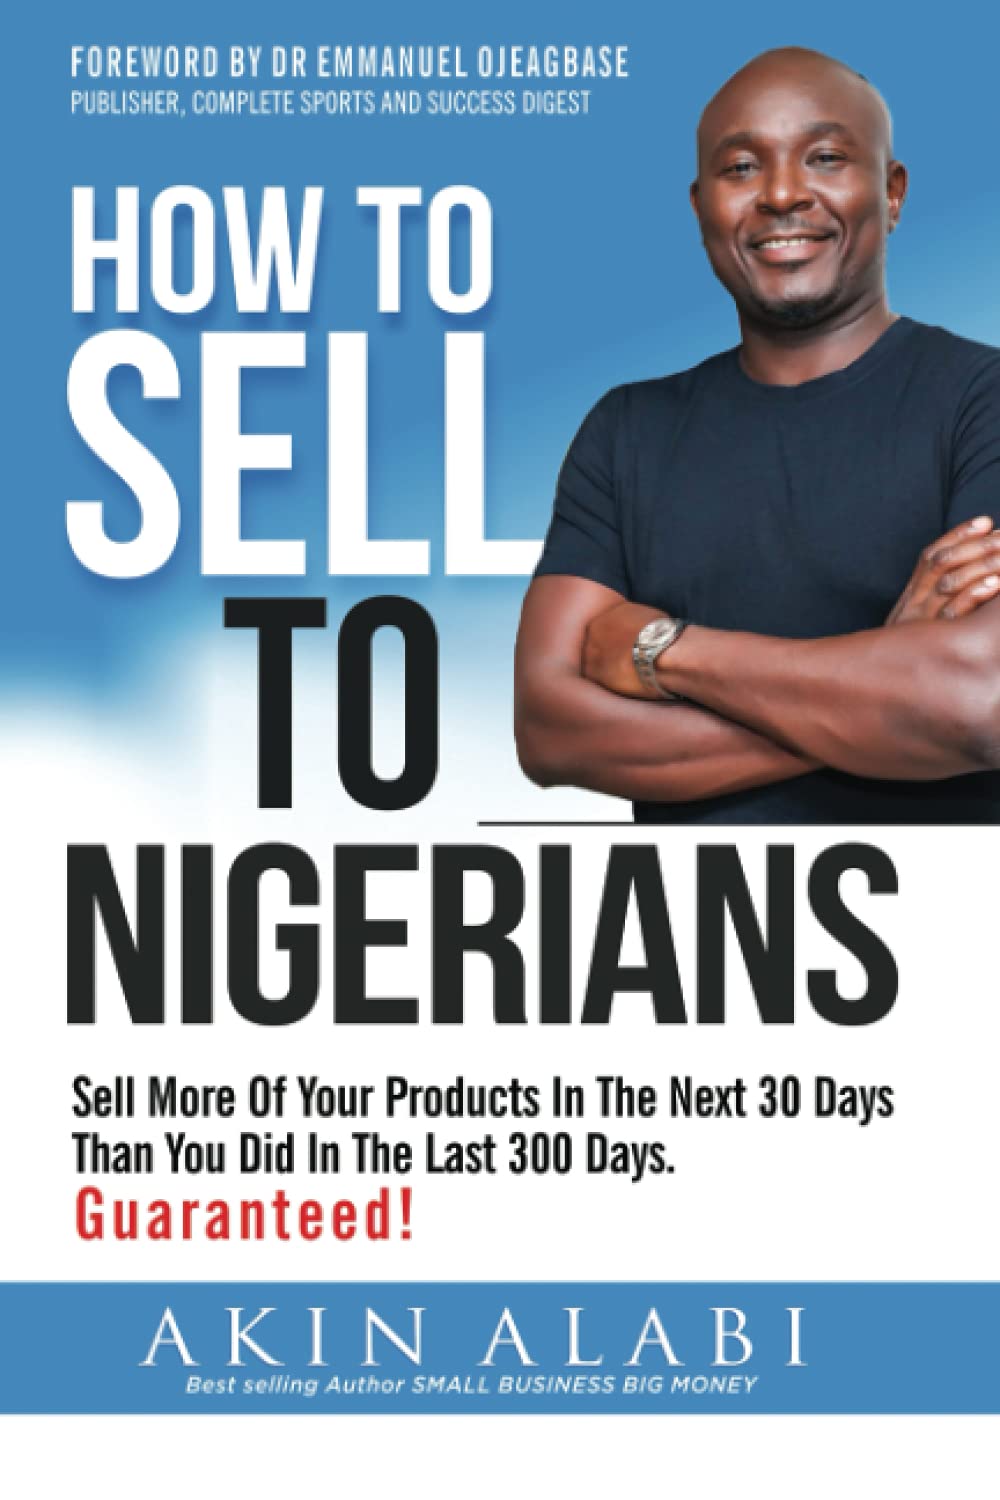 Akin Alabi - How To Sell To Nigerians